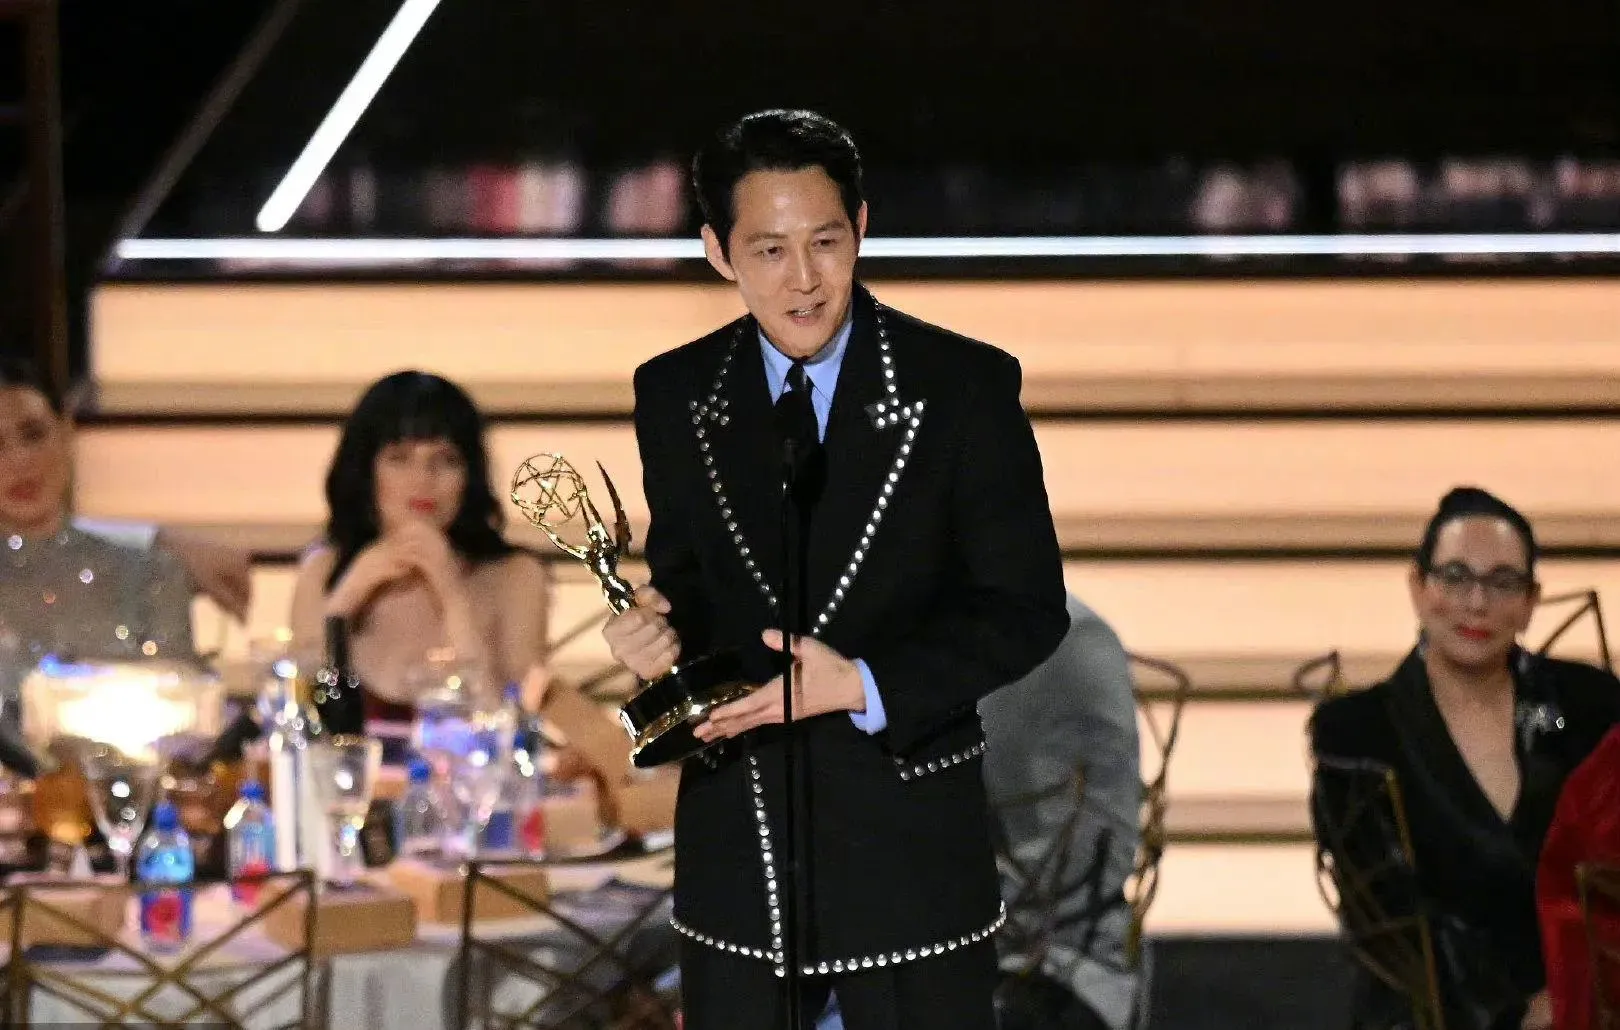 Jung-jae Lee wins Best Actor in a Drama Series for 'Squid Game' at 2022 Emmy Awards | FMV6